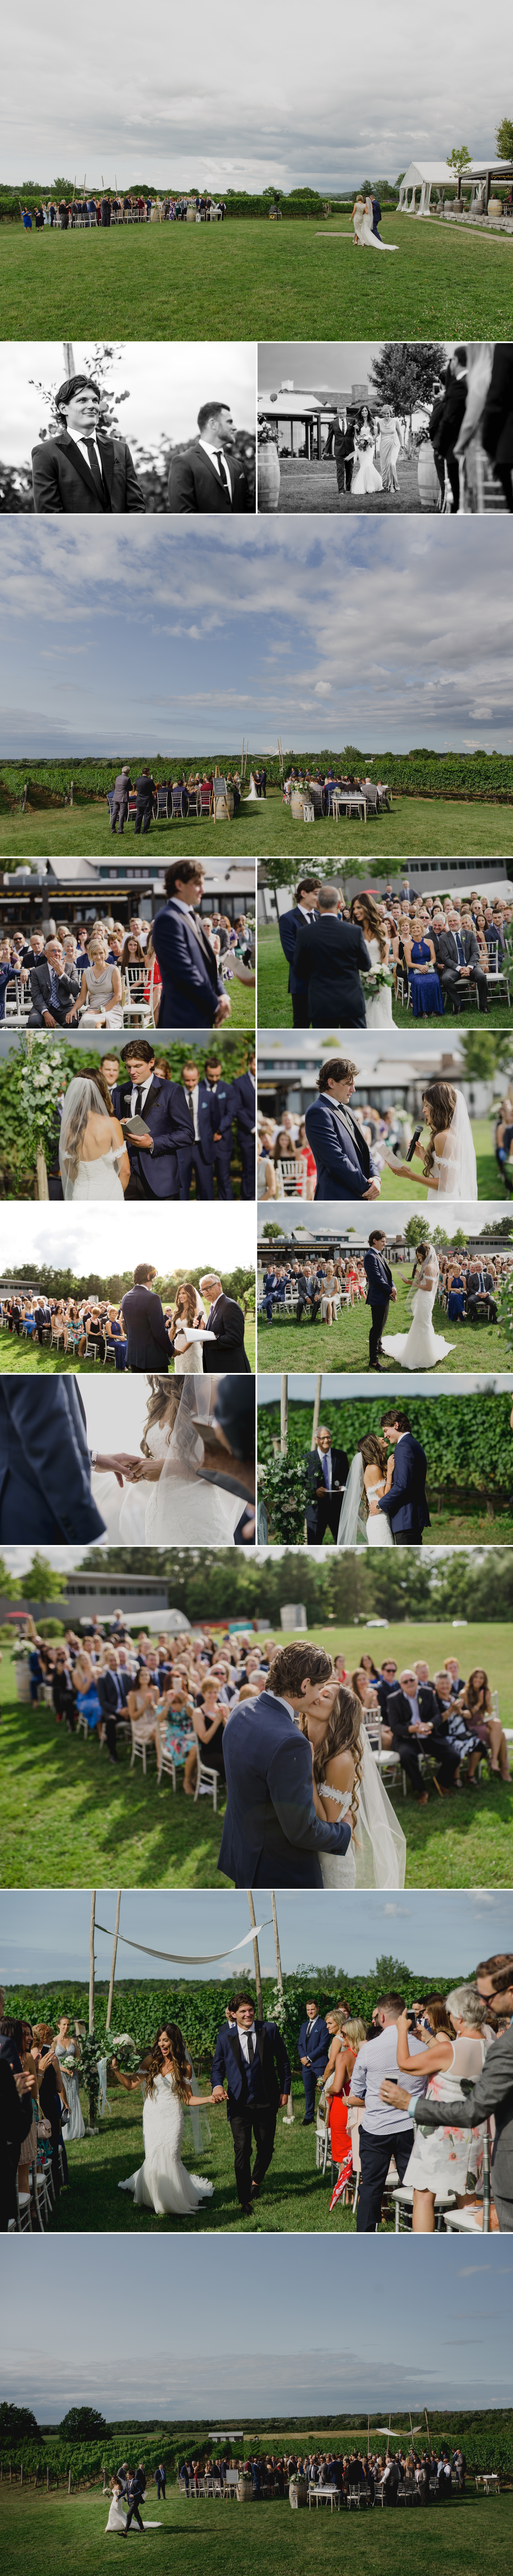 photos of candid moments during a wedding ceremony at the ravine vineyard in niagara on the lake ontario